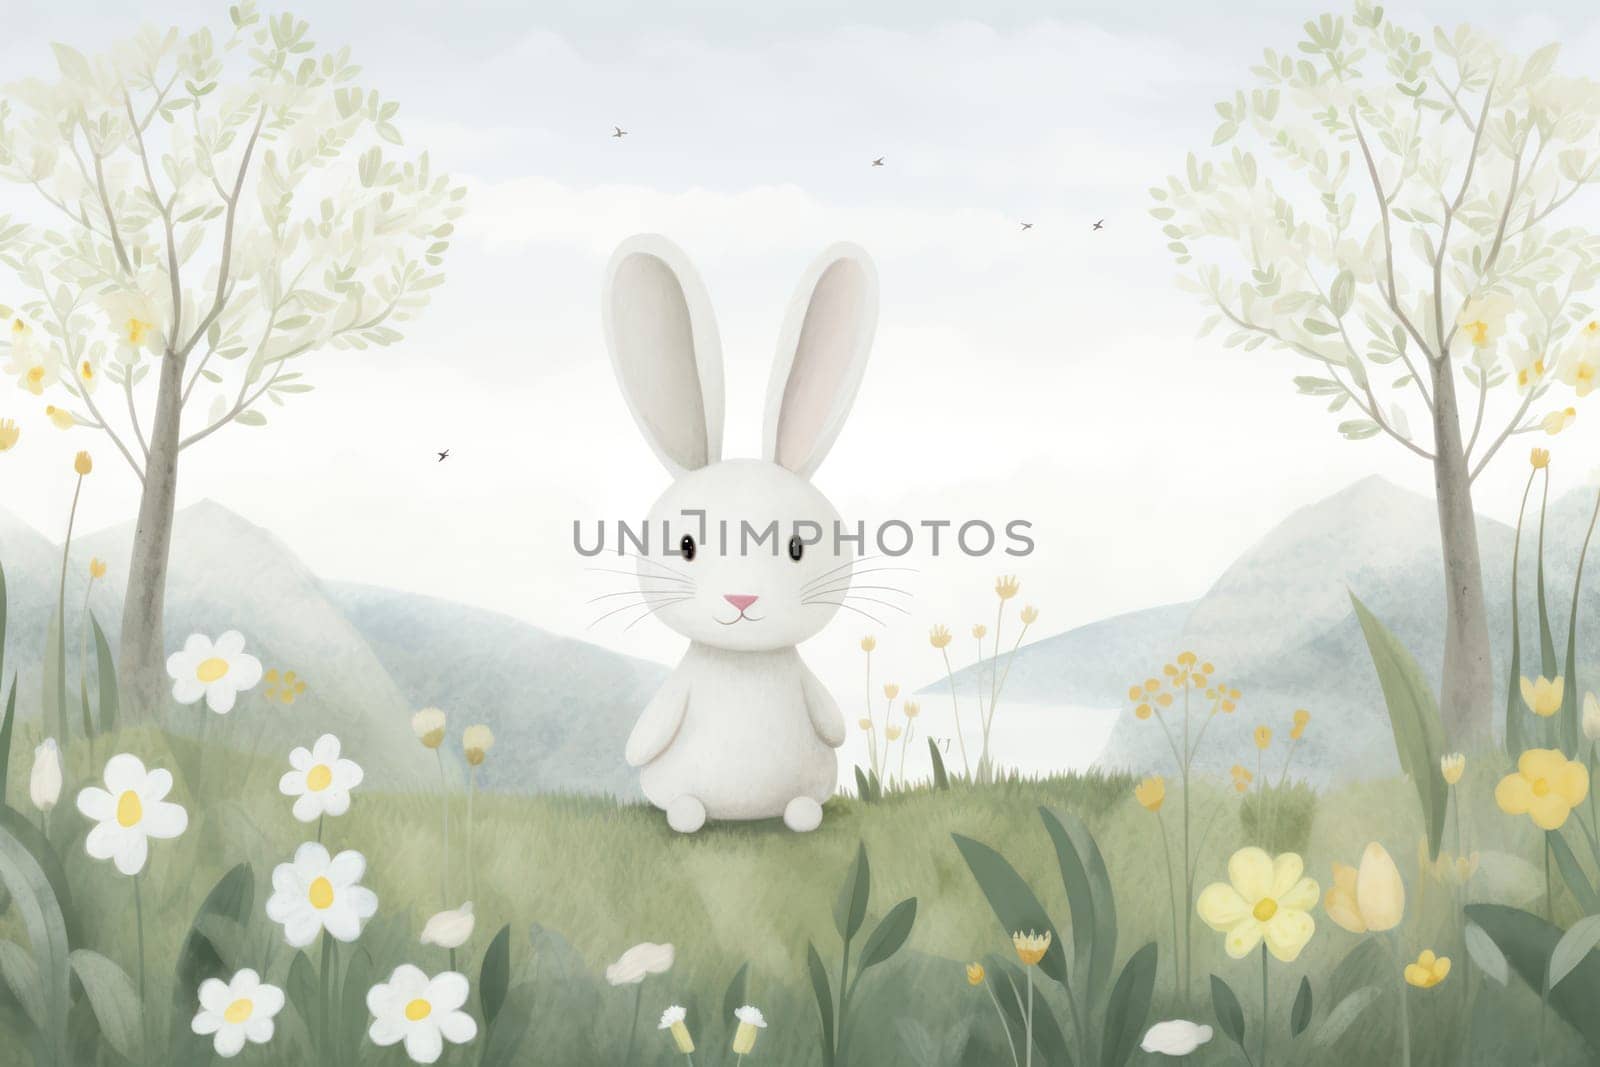 Happy Bunny Hop: Cute Rabbit Cartoon Illustration on Colorful Spring Meadow by Vichizh